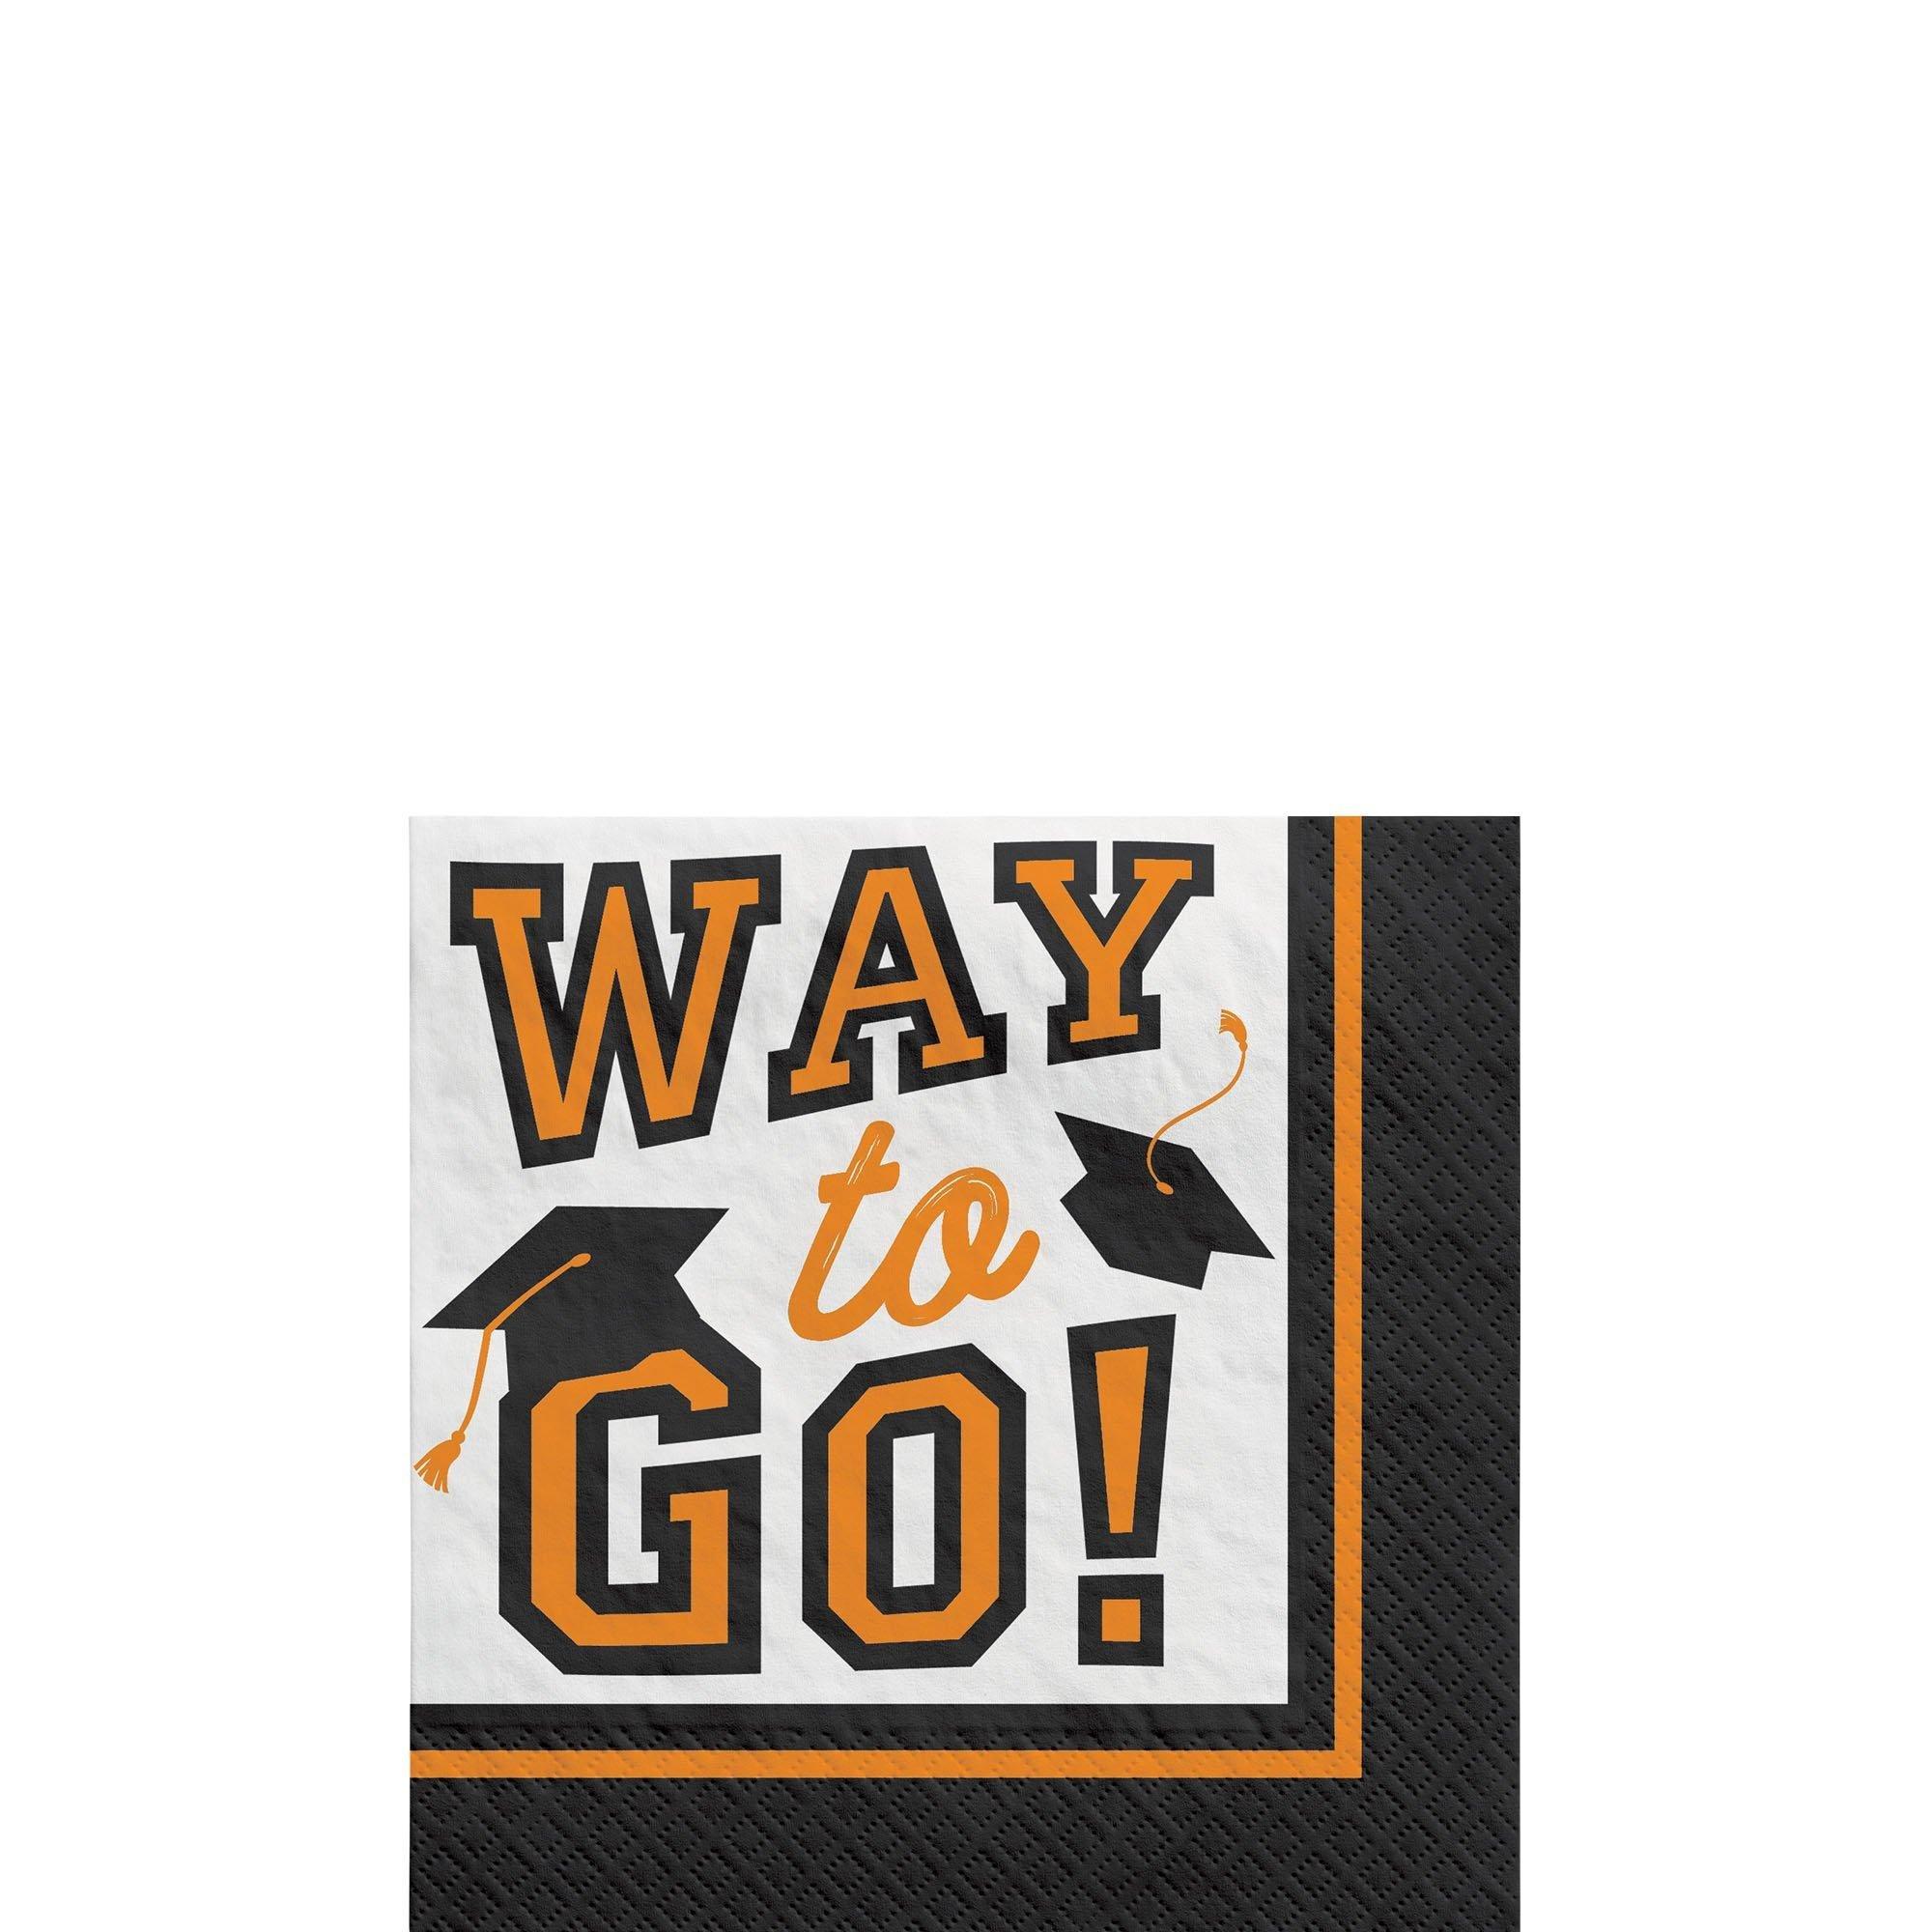 Graduation Party Supplies Kit for 40 with Decorations, Balloons, Plates, Napkins, Cups - Orange Congrats Grad